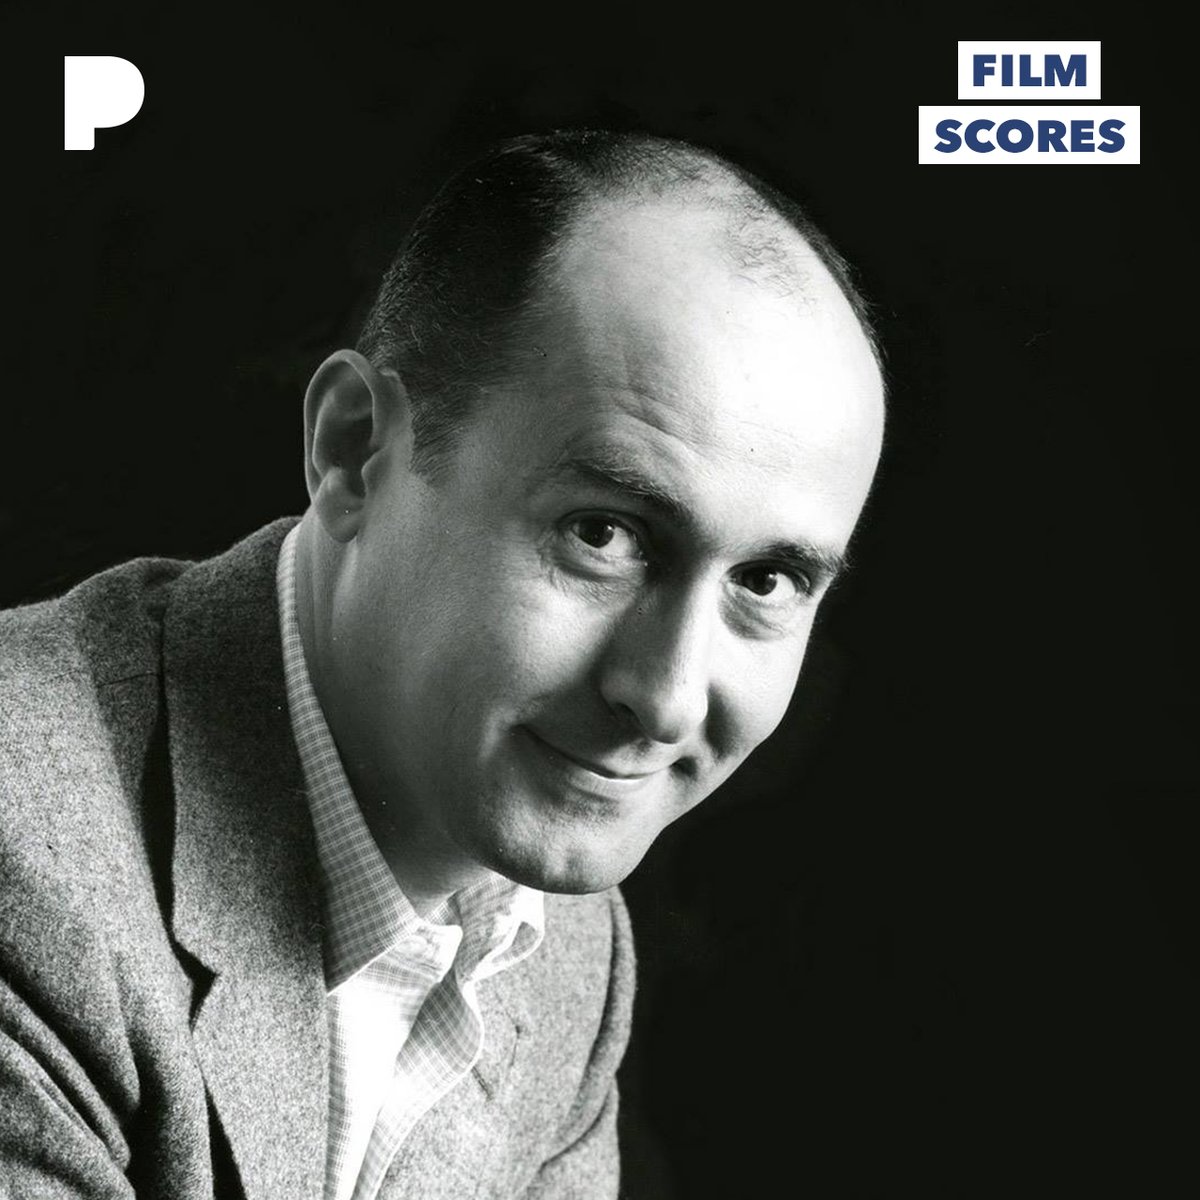 Celebrate the centennial of legendary film and TV composer @henrymancini on our pop-up on Pandora’s Film Scores station! You’ll hear a selection of some of his most recognizable theme songs along with stories from his three children. Listen now - pandora.app.link/WQhRvVTXQIb